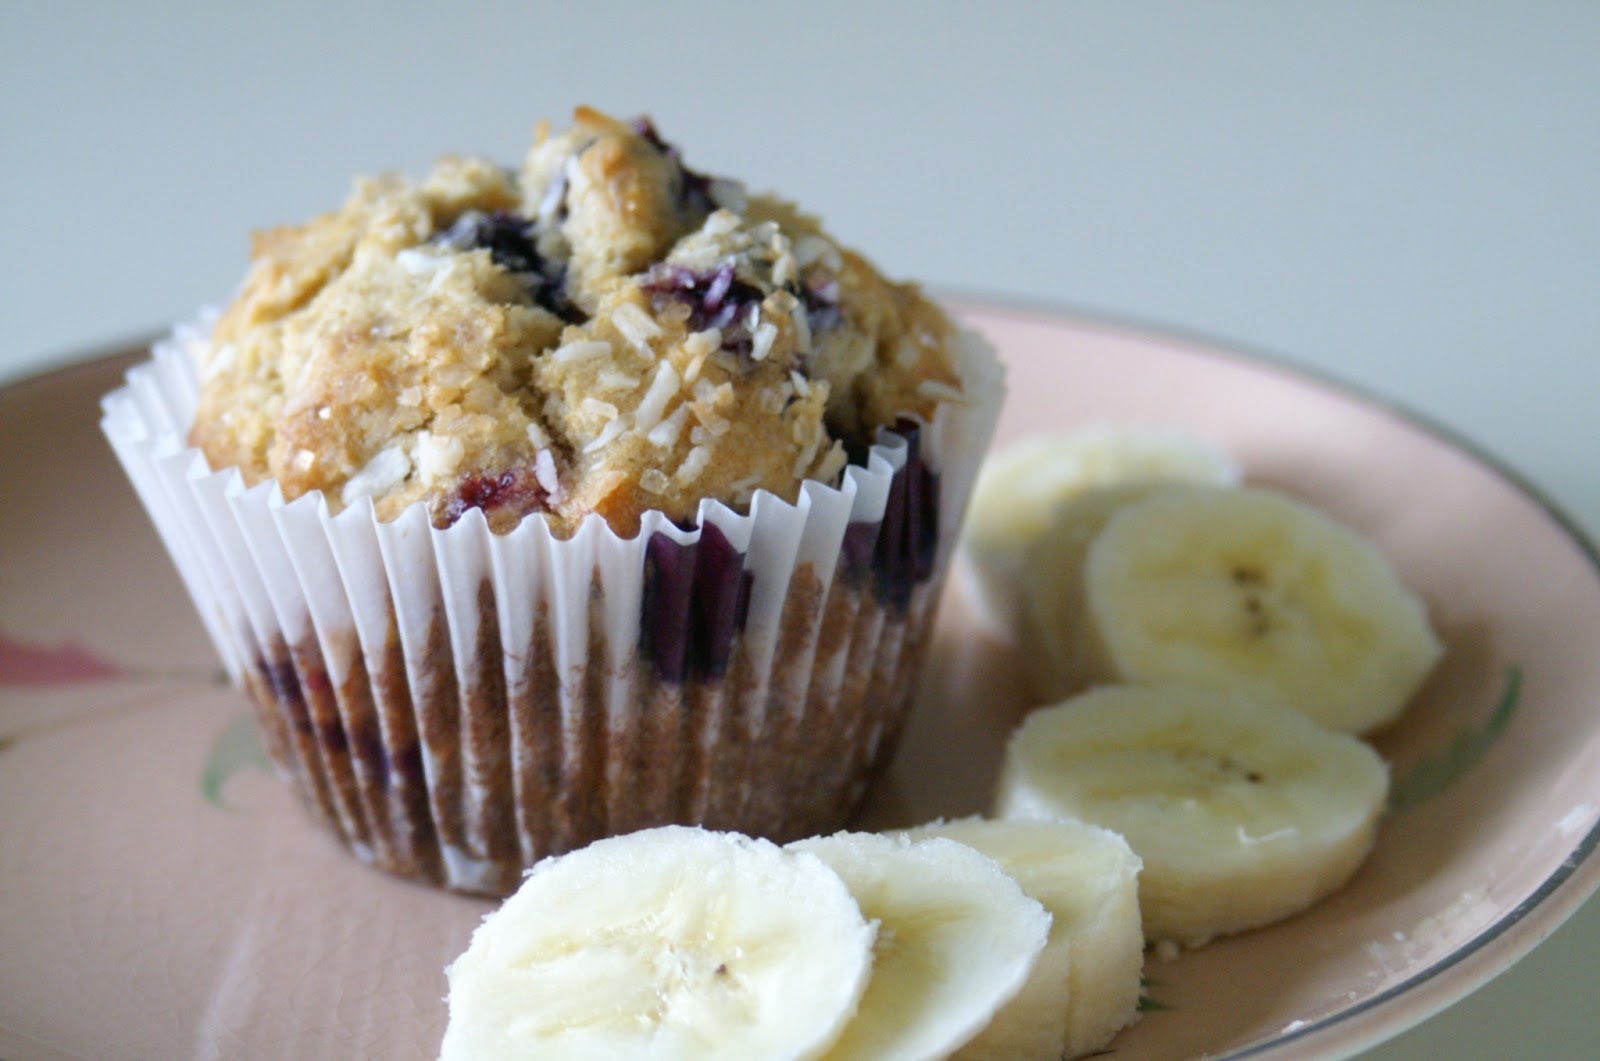 Graceful Oven: Banana Blueberry Coconut Muffins